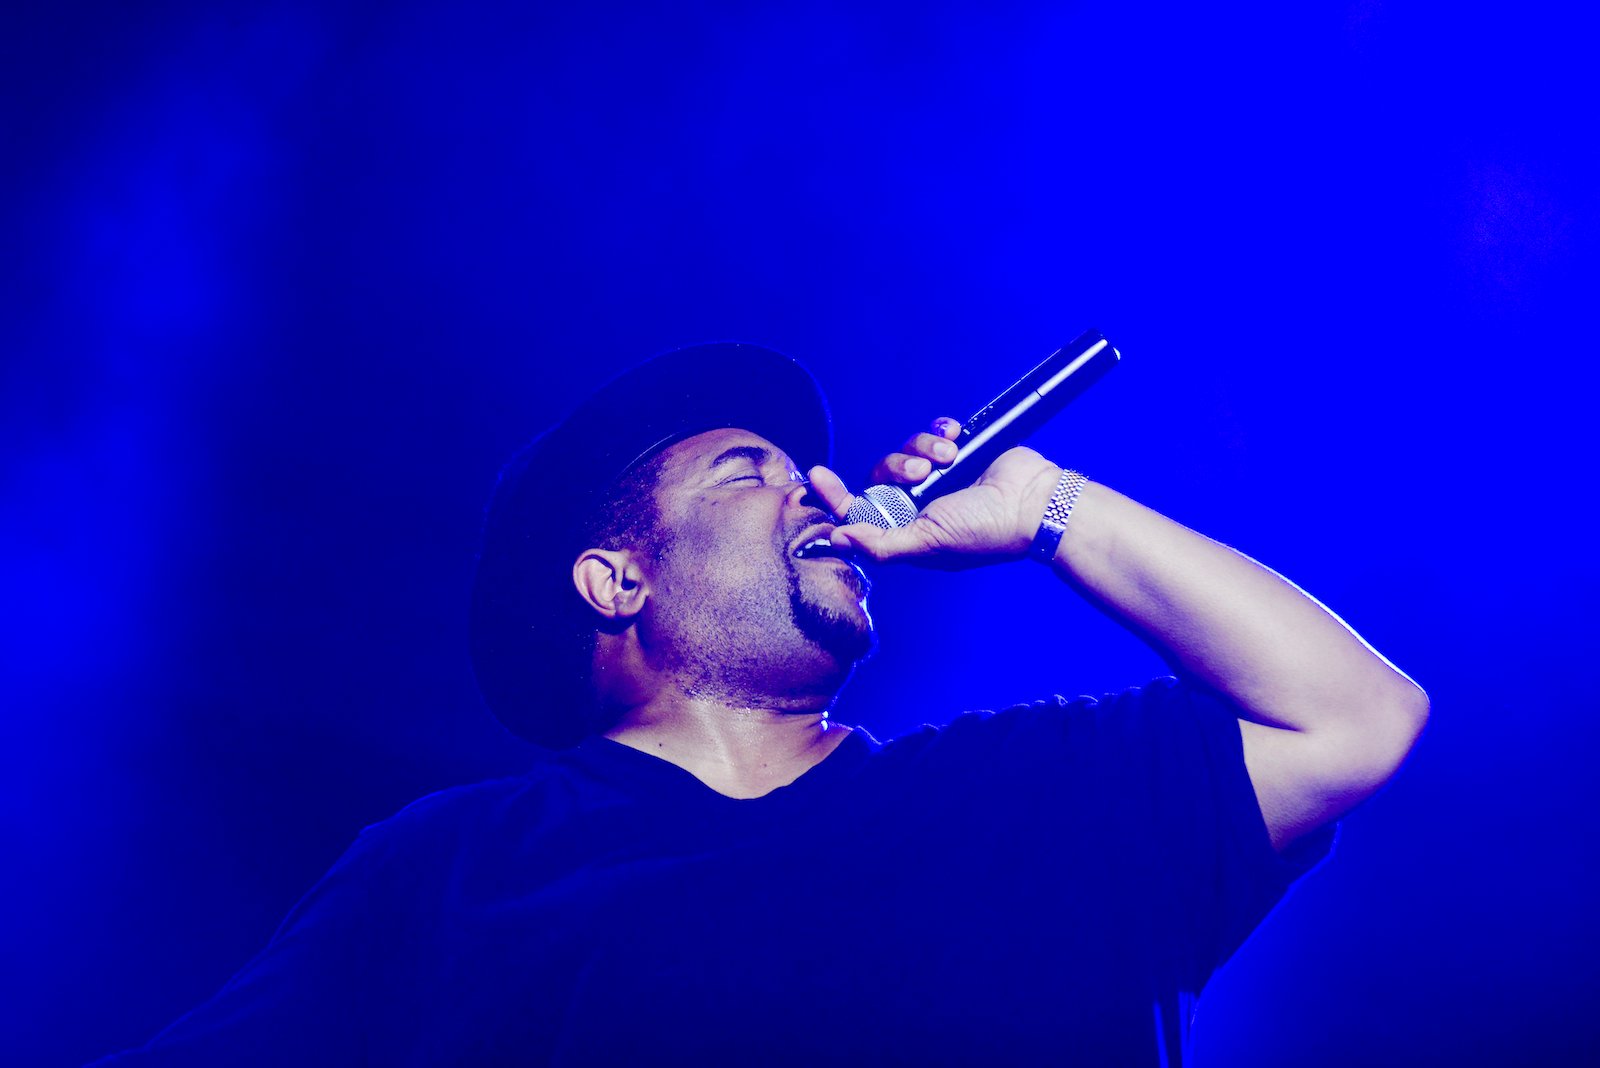 Sir Mix-A-Lot performed on stage and holds a microphone